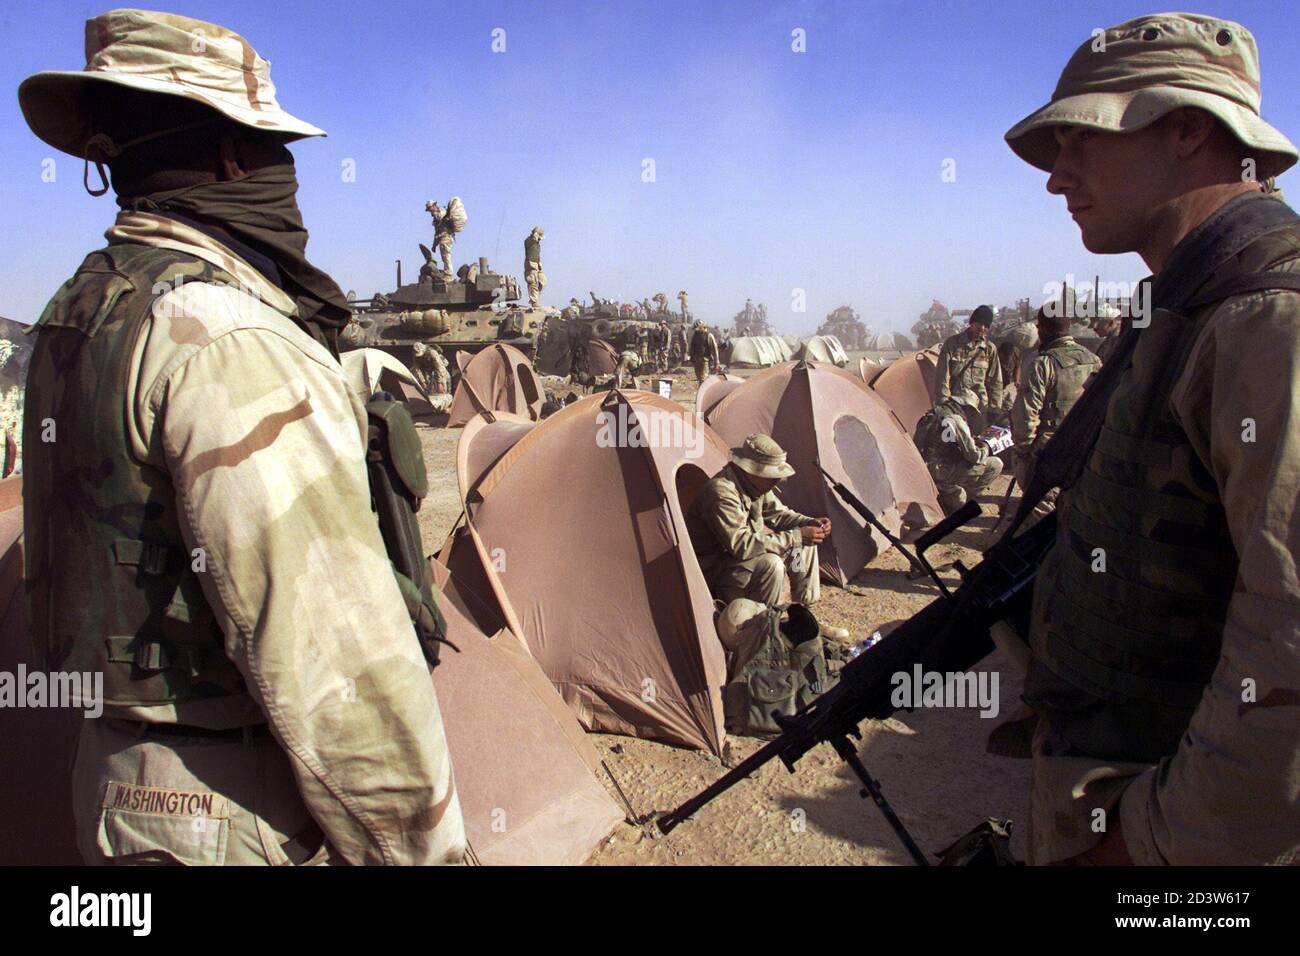 US Marine Lance Cpl Eric from San Antonio, Texas holds a SAW, a Squad Automatic Weapon, which holds 200 rounds of 5.56 machine gun bullets, standing with a friend with his face covered in a cloth near a line of tents outside the US Marines operating base in southern Afghanistan December 3, 2001 during a sand storm. Behind are LAV (Light Armoured Vehicles) used for patrols and forward reconnaissance missions. The US Marines PAO (Press Affairs Office) has asked journalists in southern Afghanistan not to use last names as there has been security concerns with family members in the United States.  Stock Photo